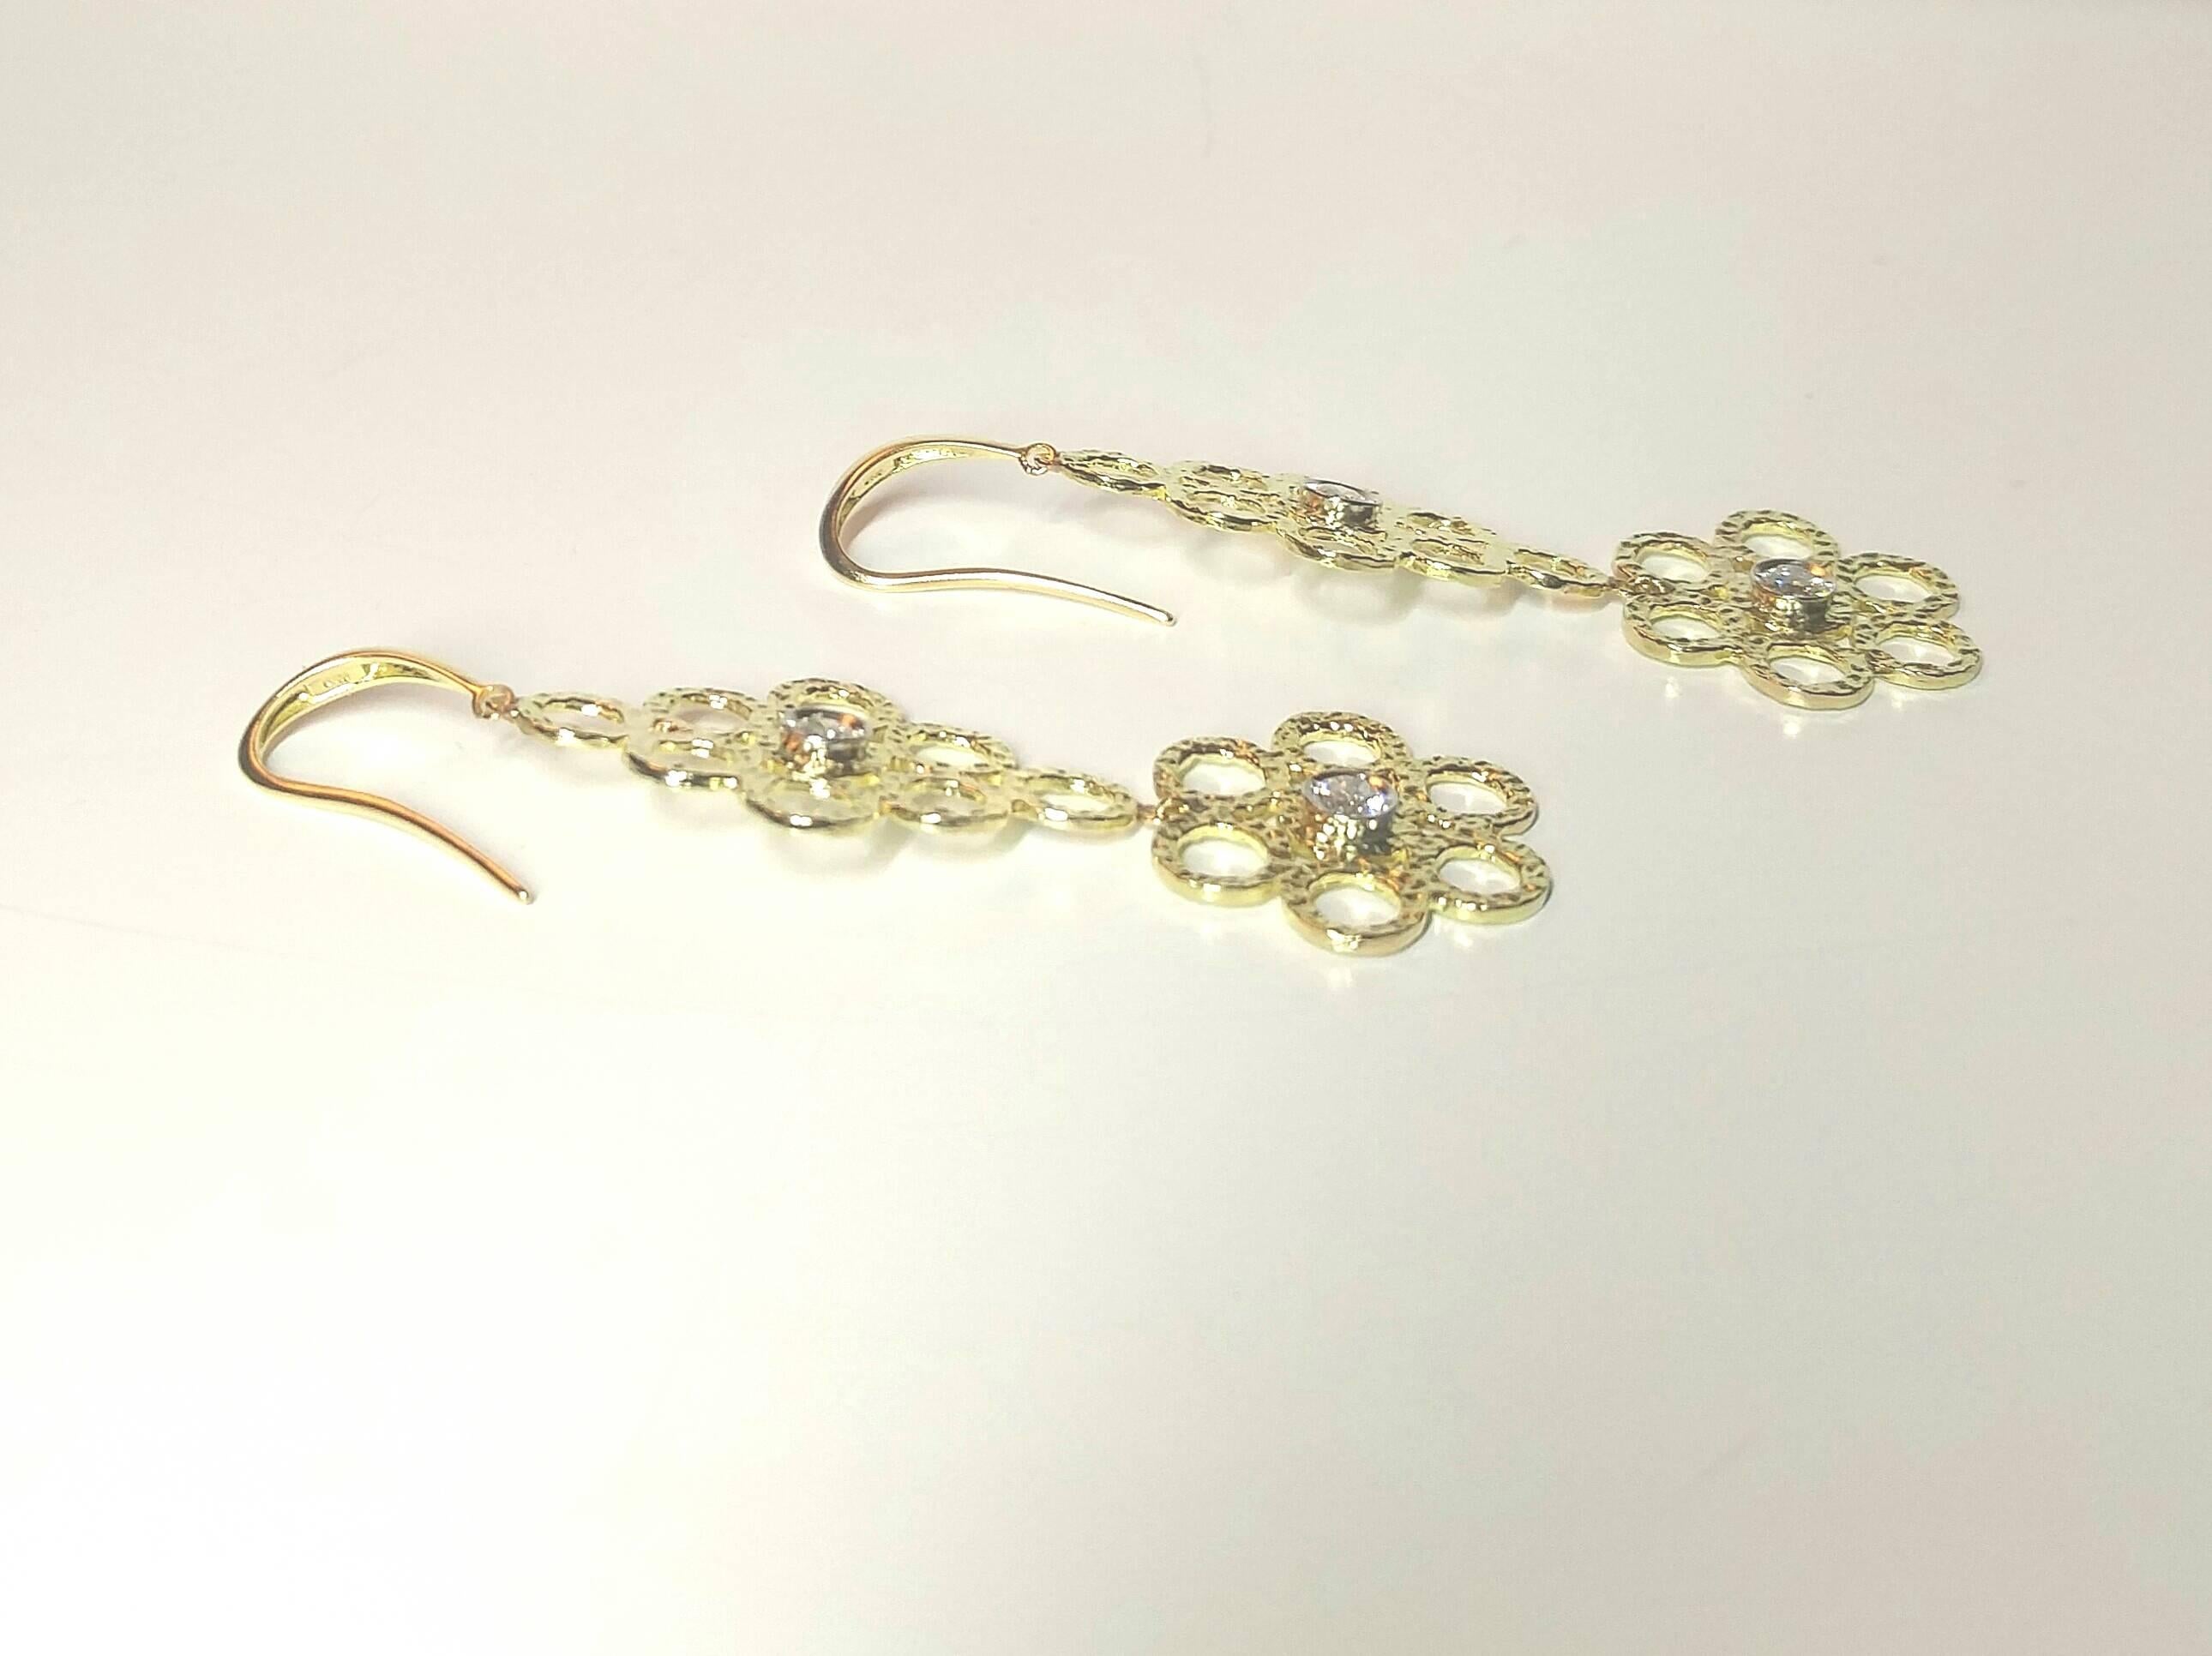 From Doria Studio Designs, "So Feminine", delicately designed large 18k gold earrings, showcasing a diamond total weight of 0.24 carats set in Platinum   

